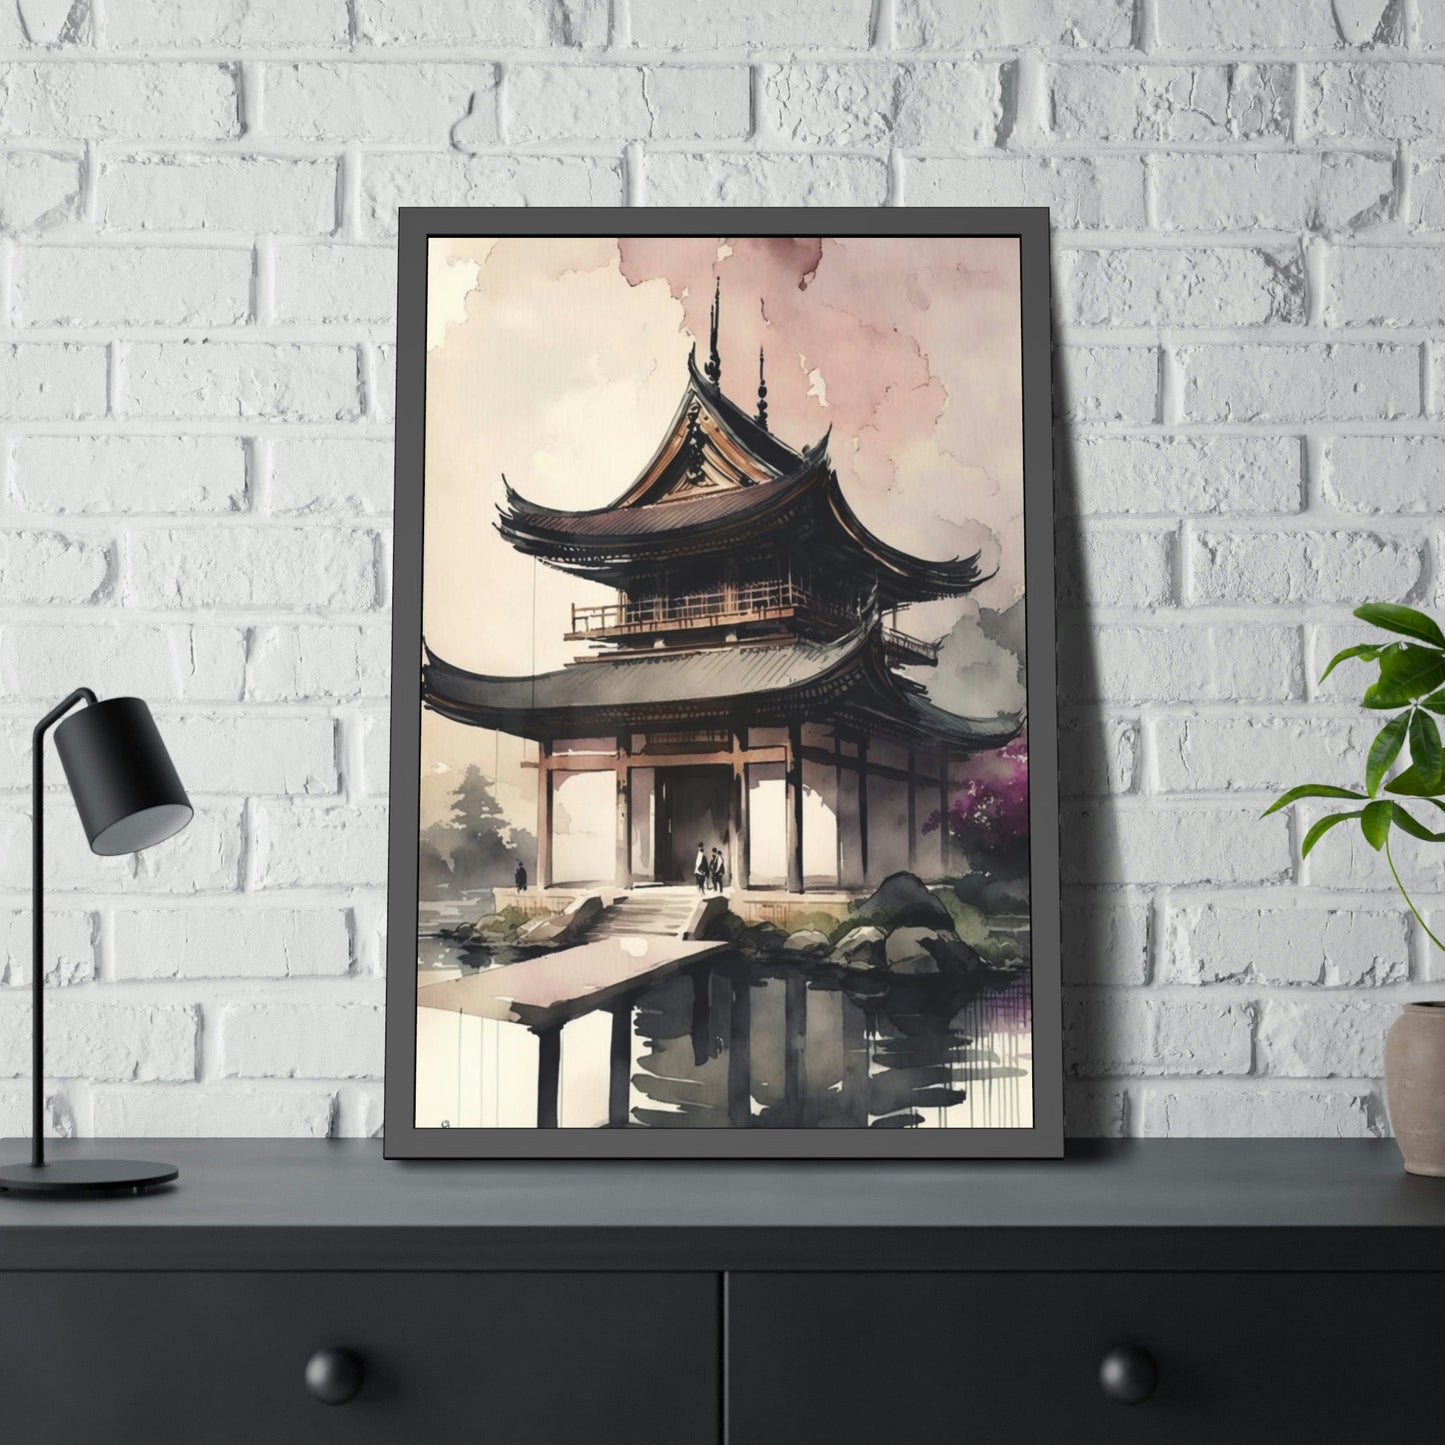 The Spirit of Asia: Abstract Art on Natural Canvas & Poster